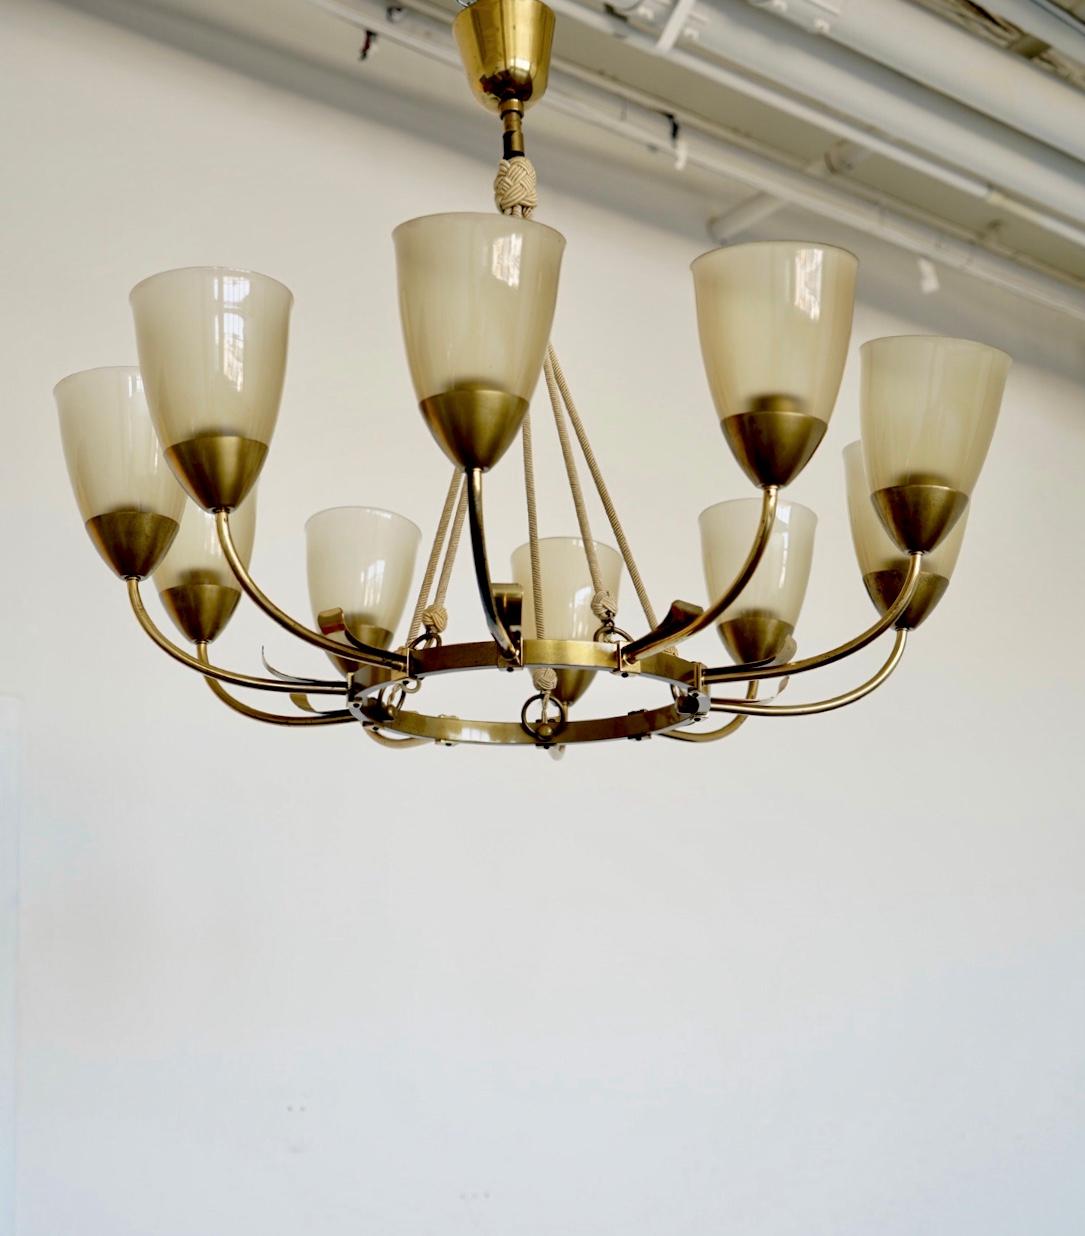 A Swedish Grace Chandelier. Polished brass and glass. 
10 E27 sockets, original glass shades, existing wires. Rewiring available upon request.